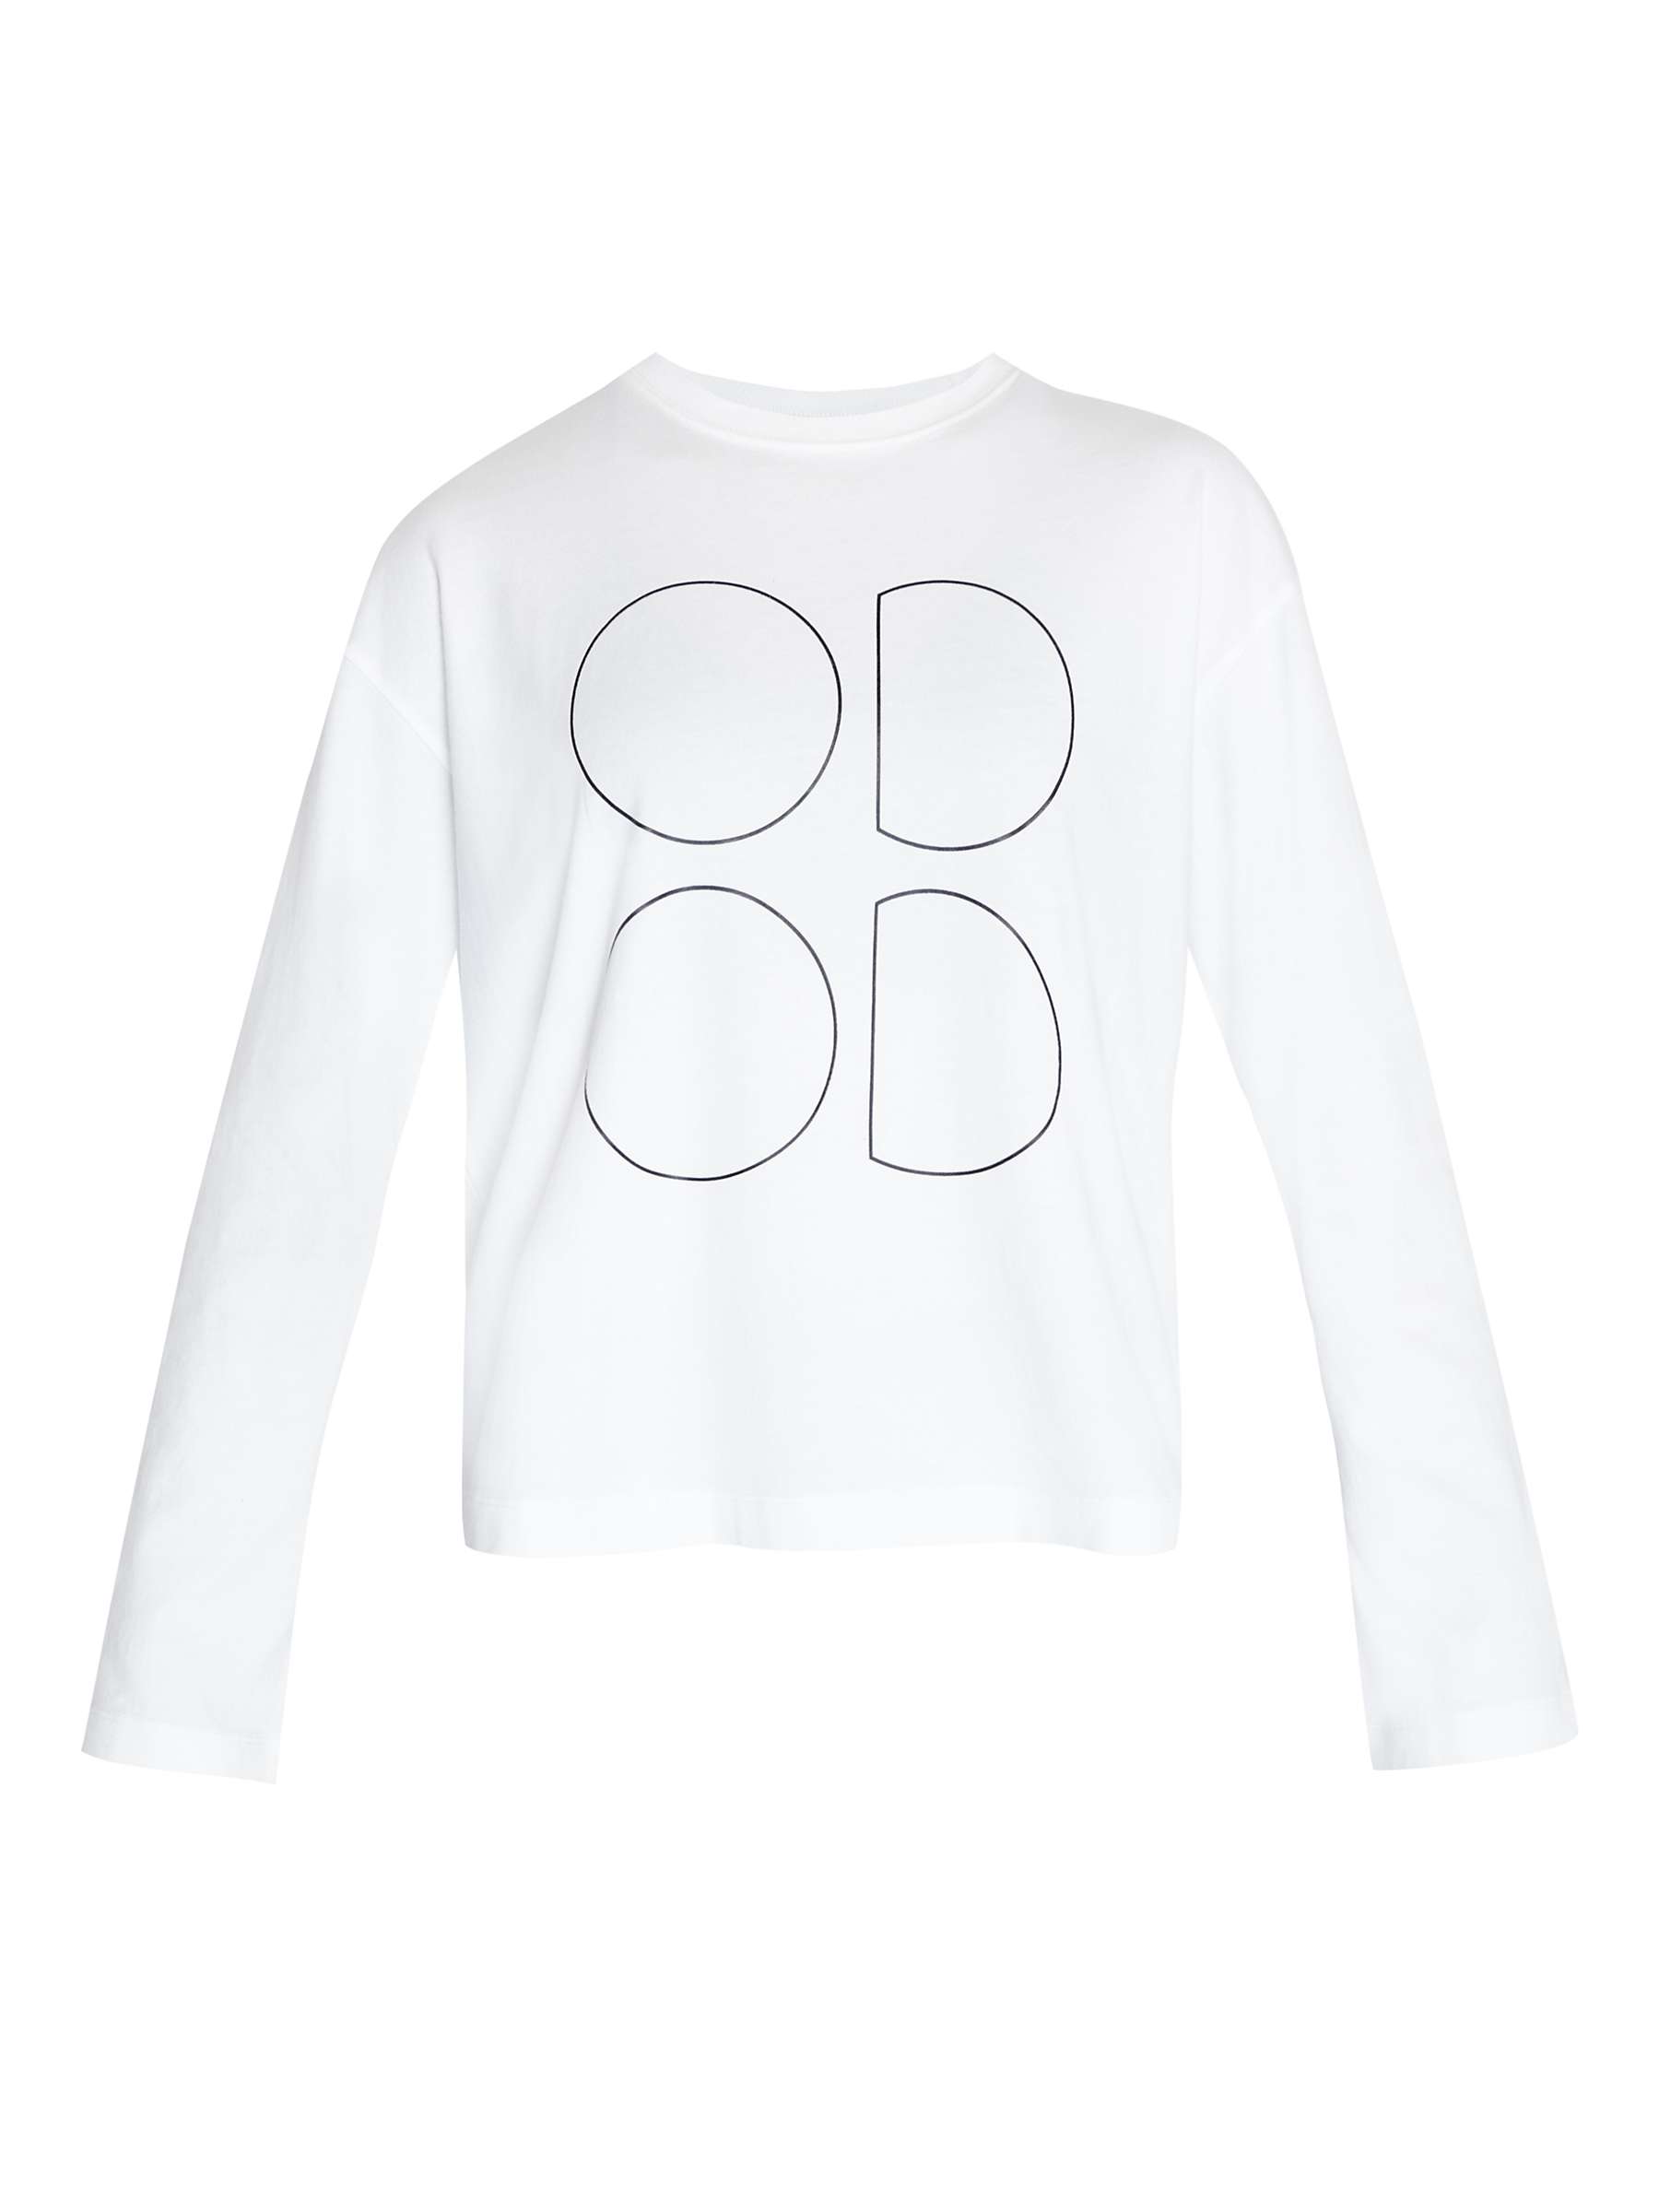 Buy Sweaty Betty Graphic Long Sleeve T-Shirt, White Online at johnlewis.com